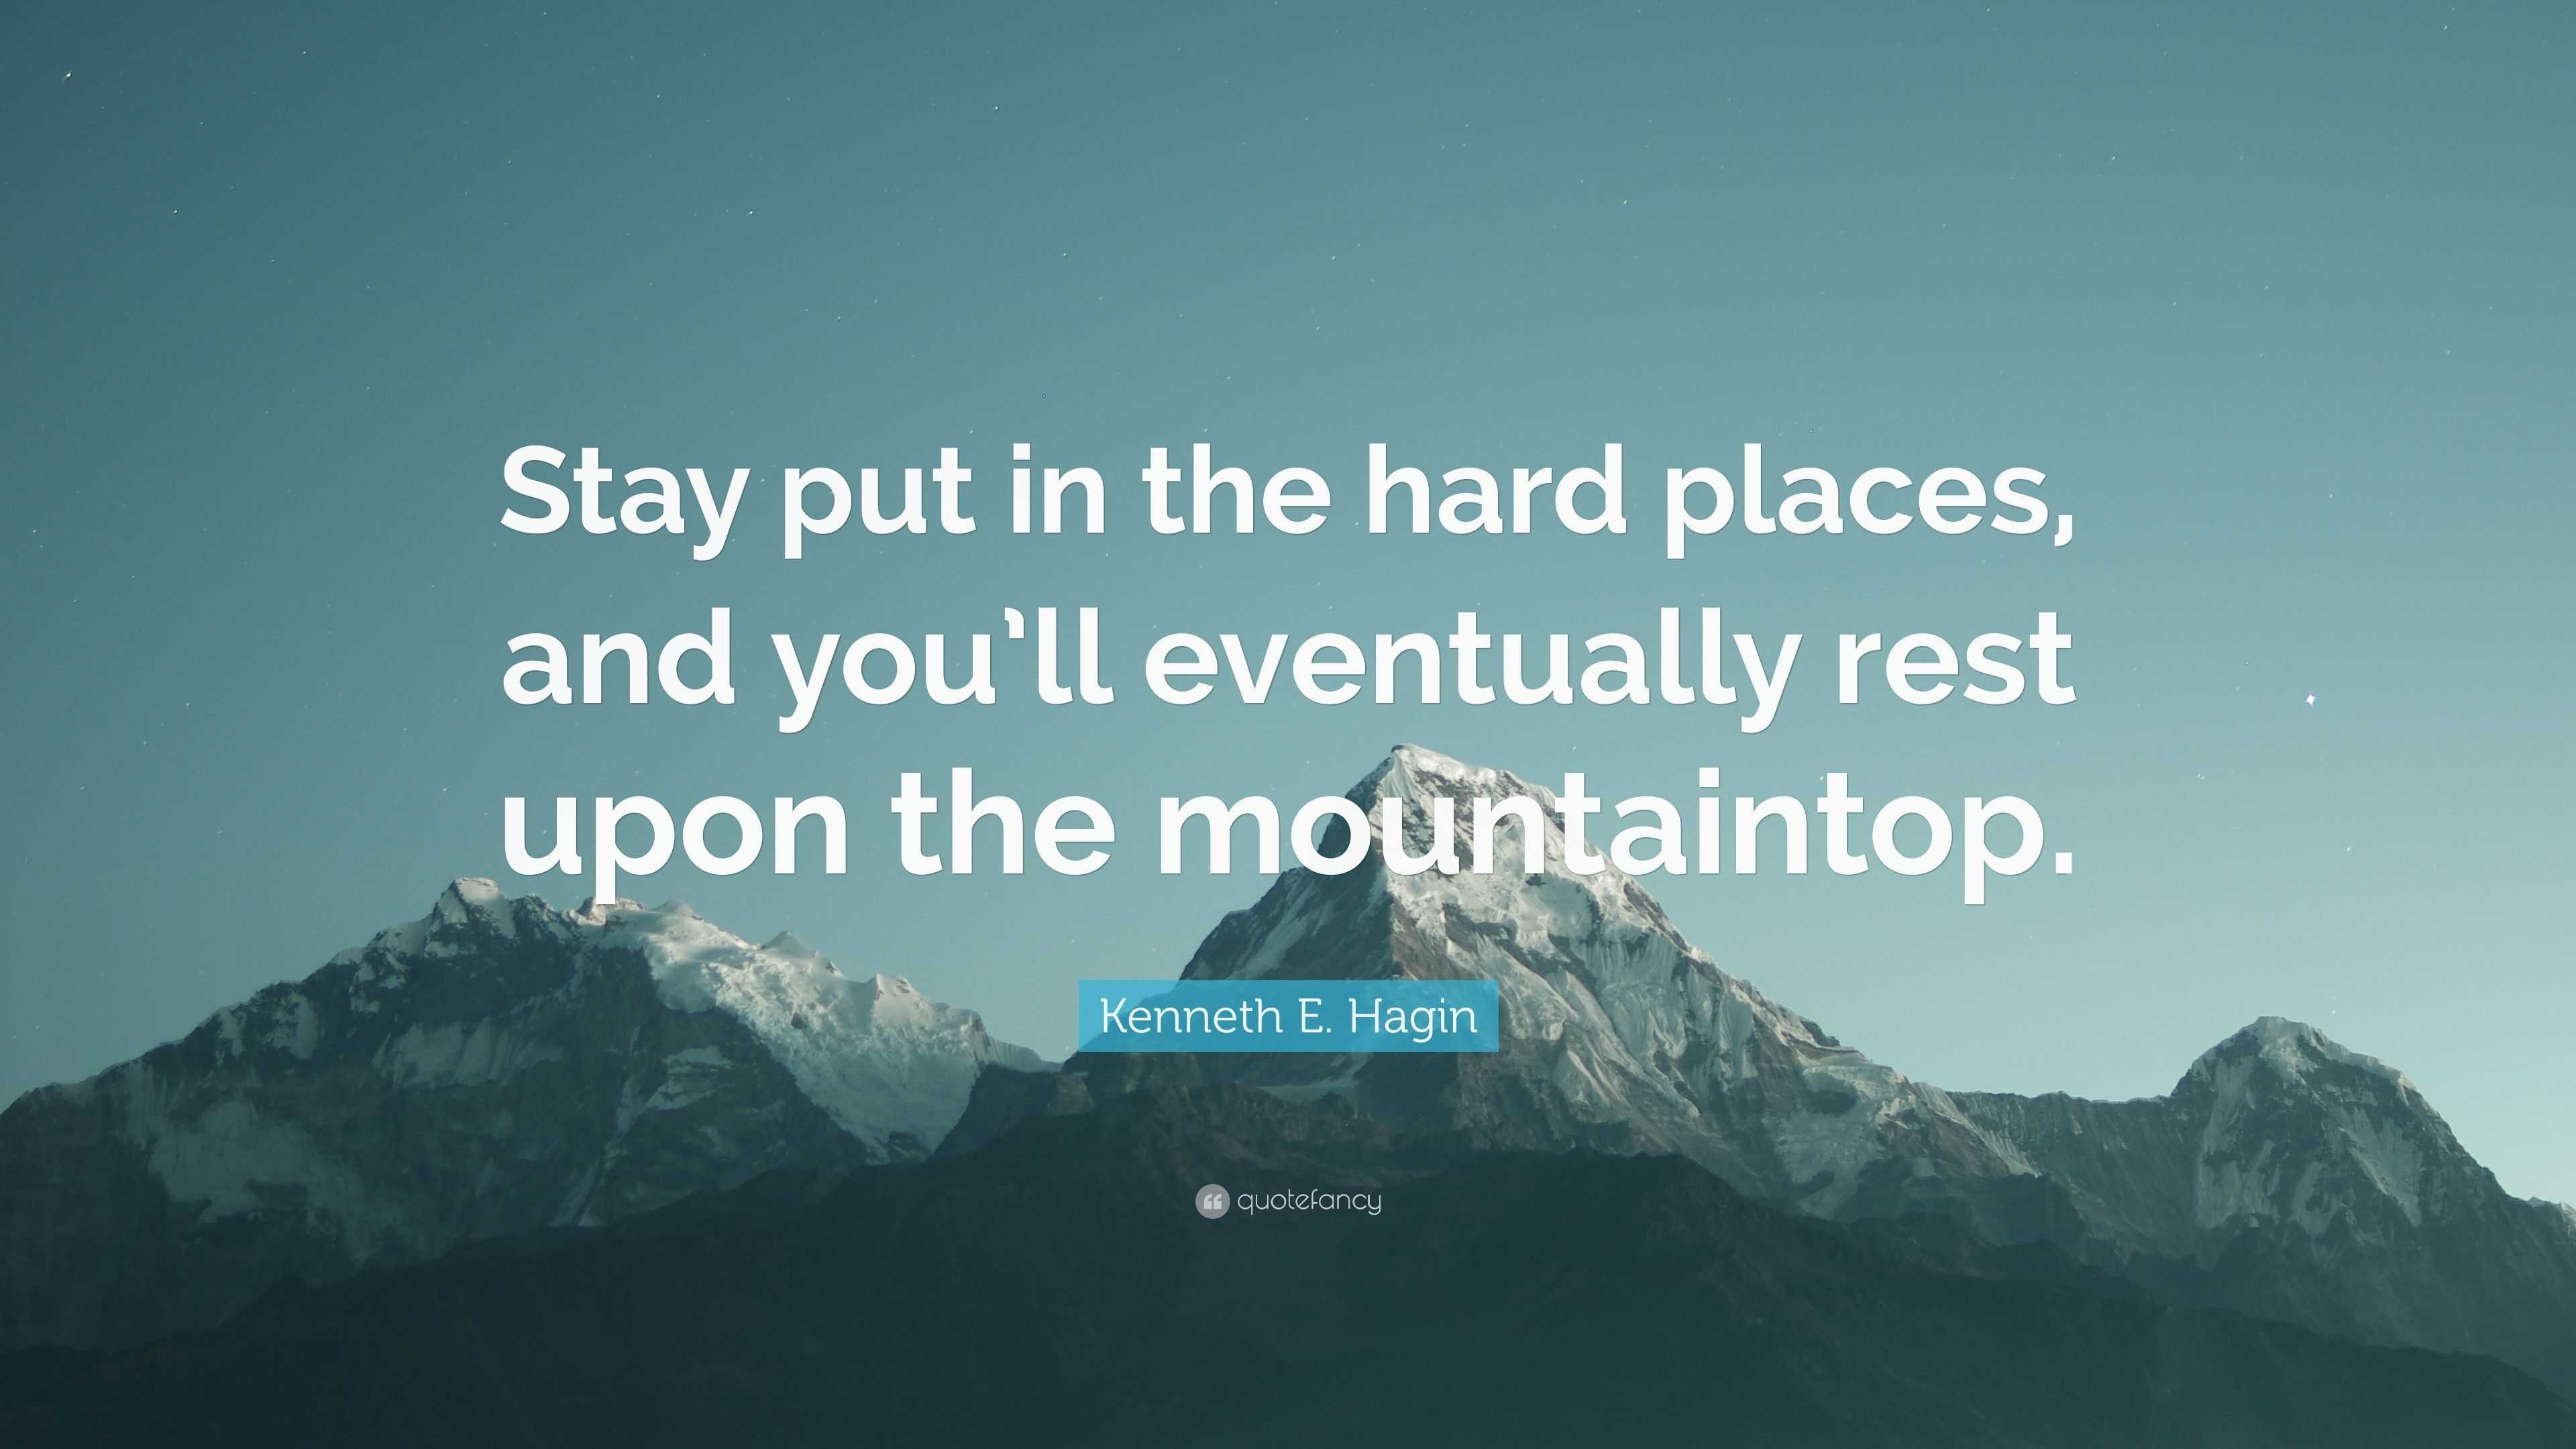 Kenneth E. Hagin Quote: “Stay put in the hard places, and you'll eventually  rest upon